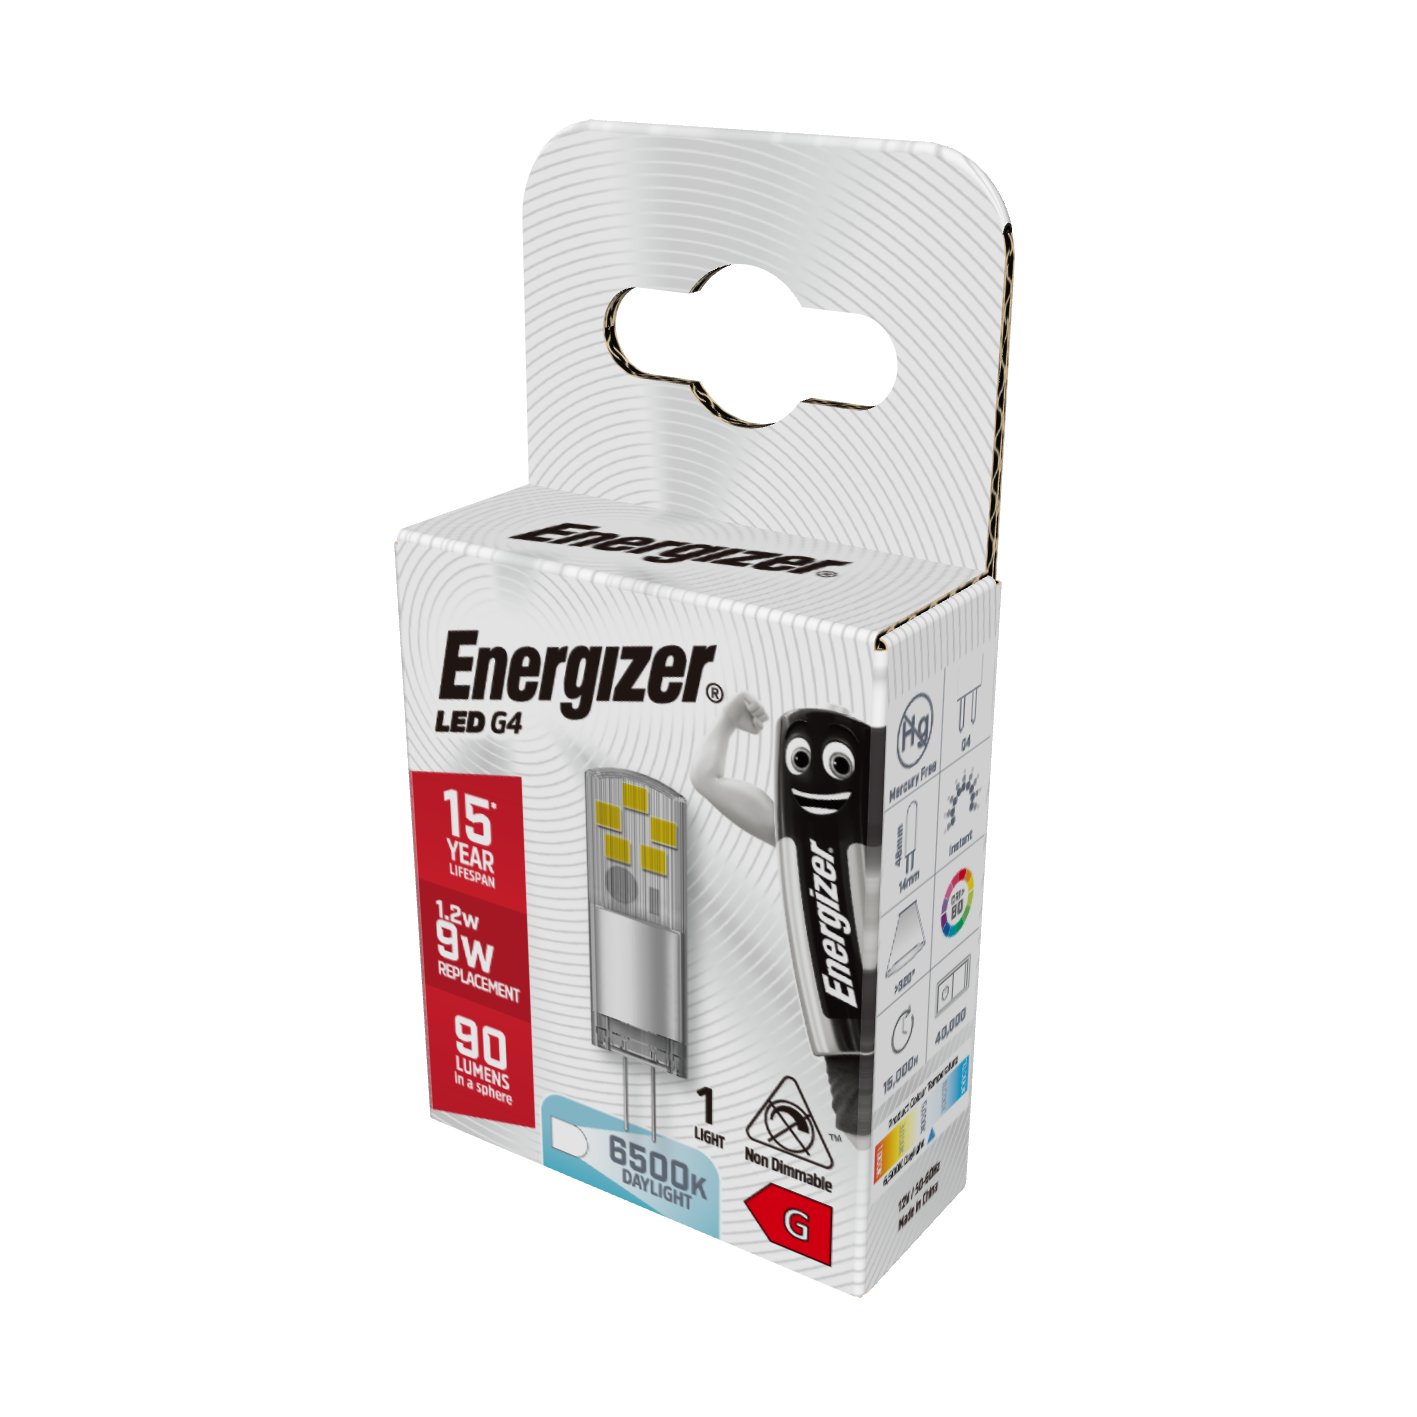 Energizer® LED G4 Capsule - 1.2W, 90 Lumen, 6,500K, Non-Dimmable